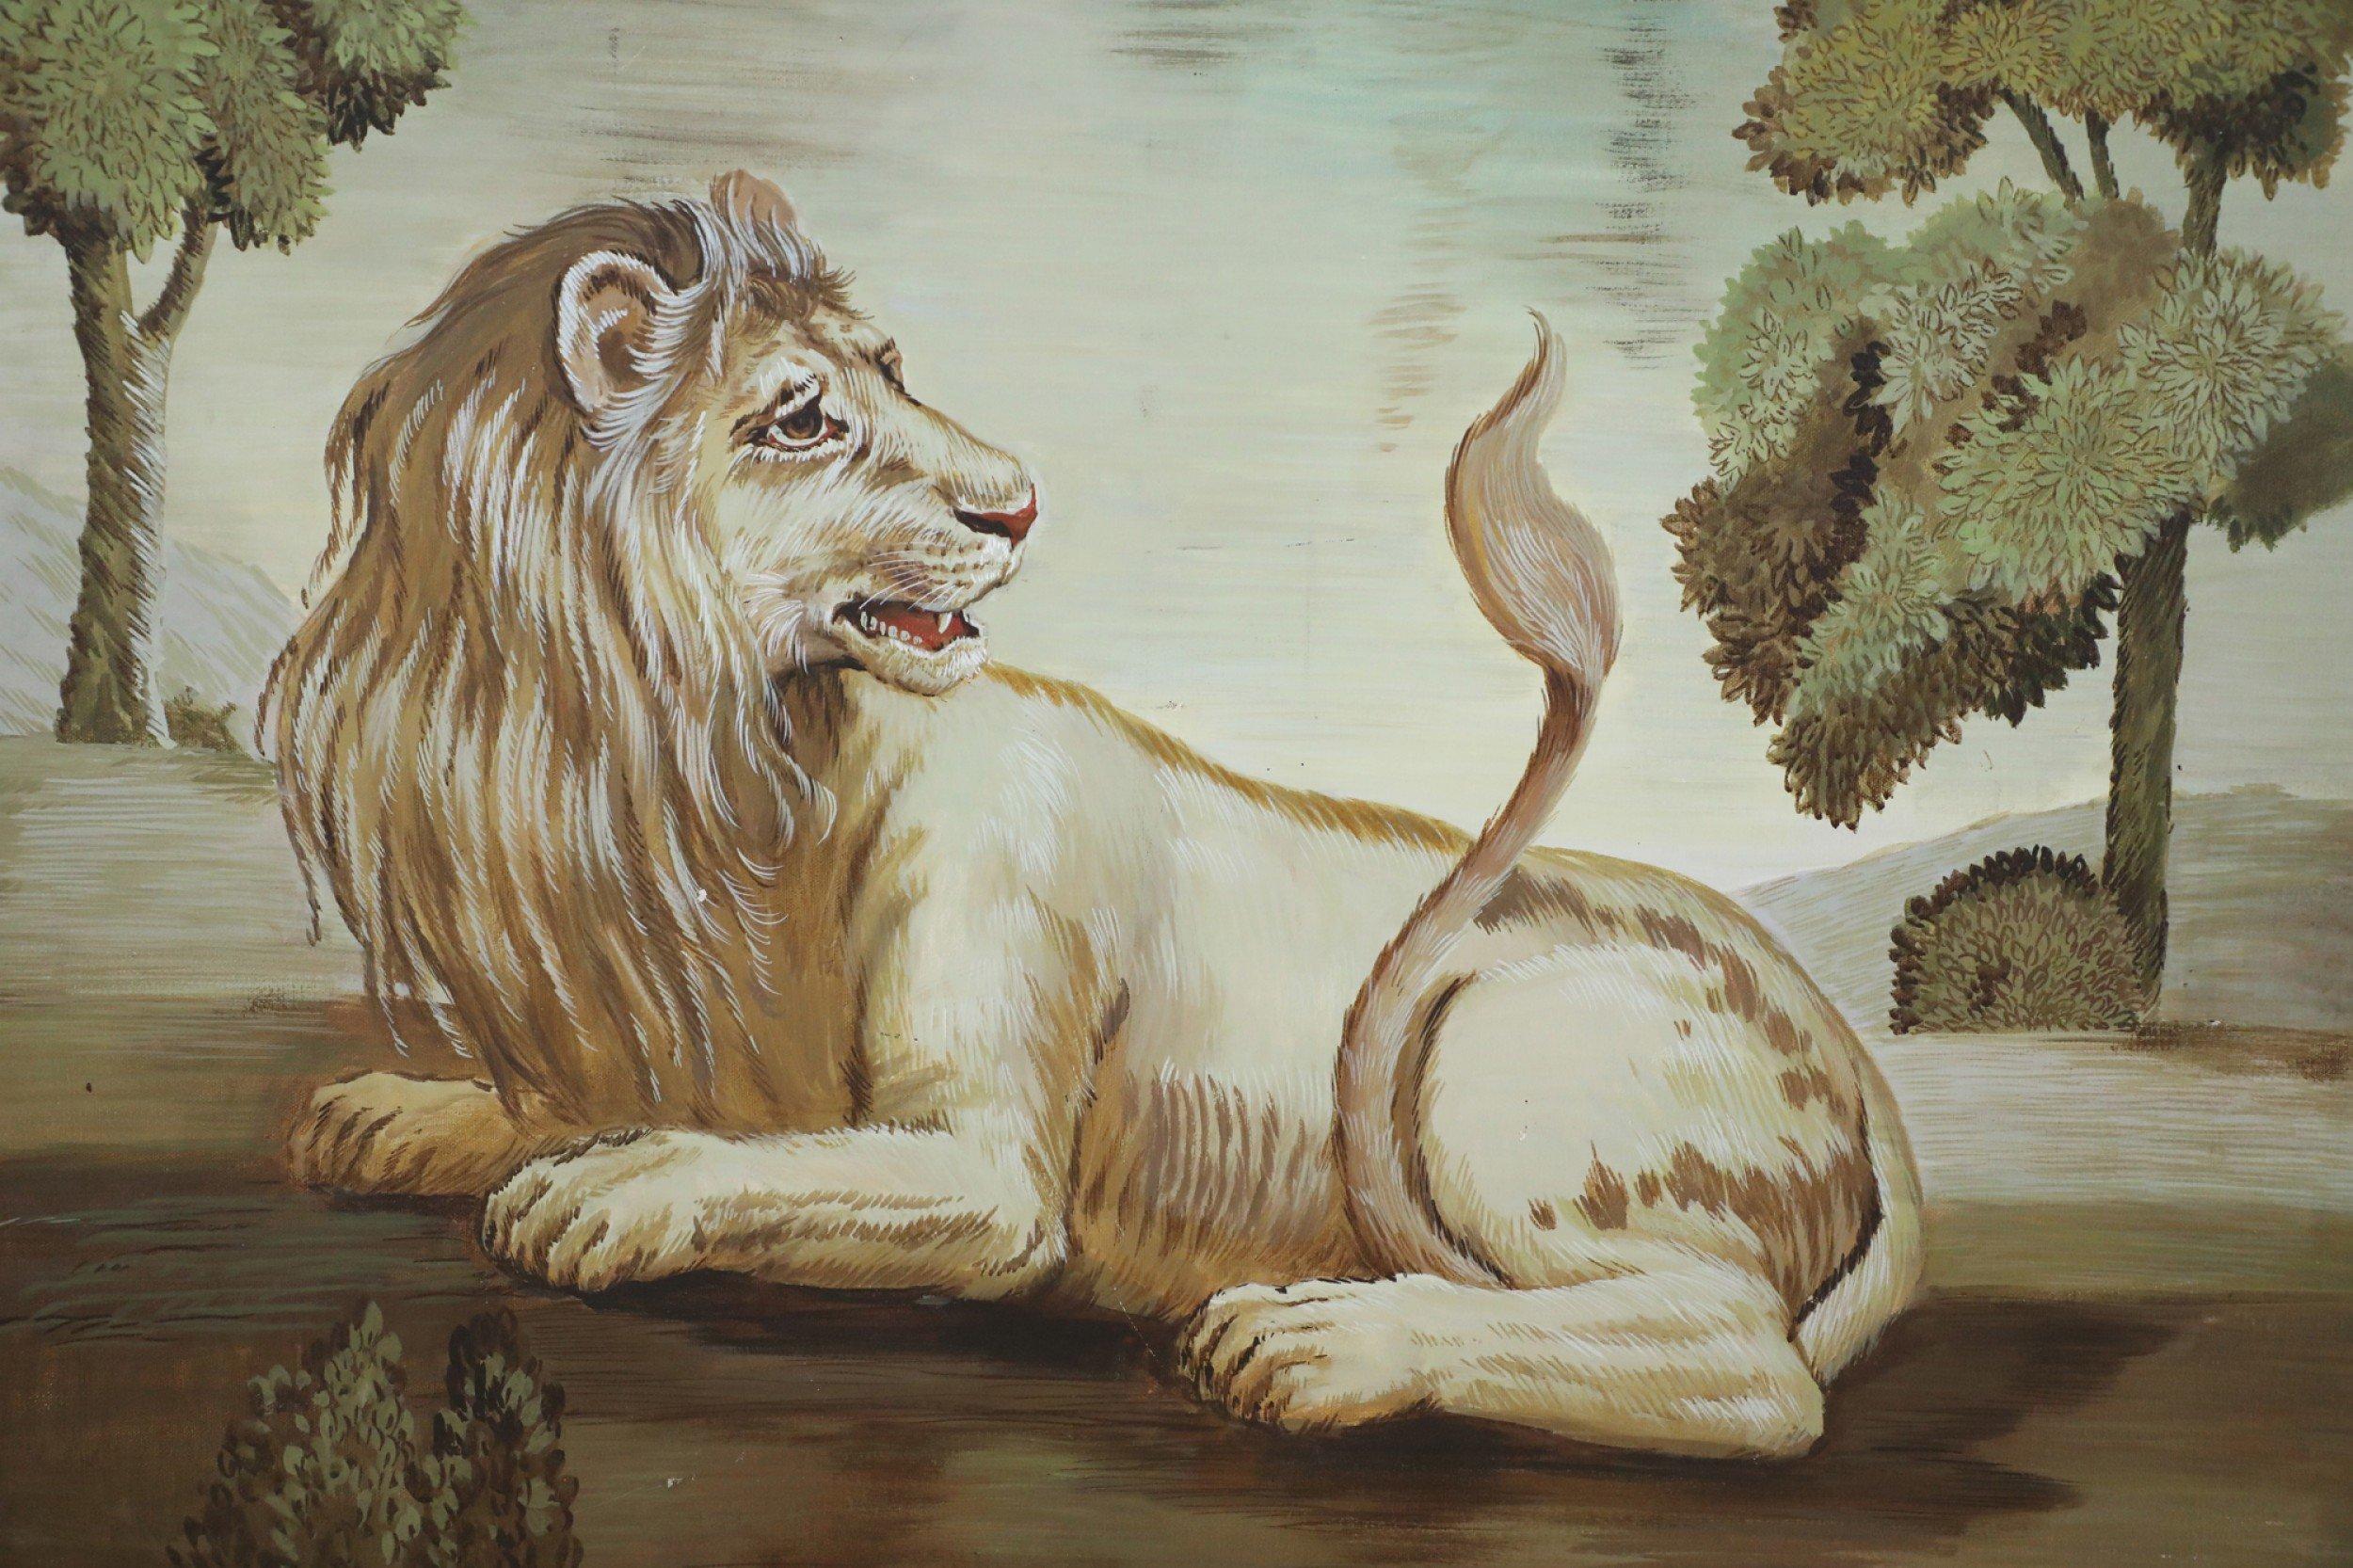 American Resting Lion Painting Oil Painting on Canvas For Sale